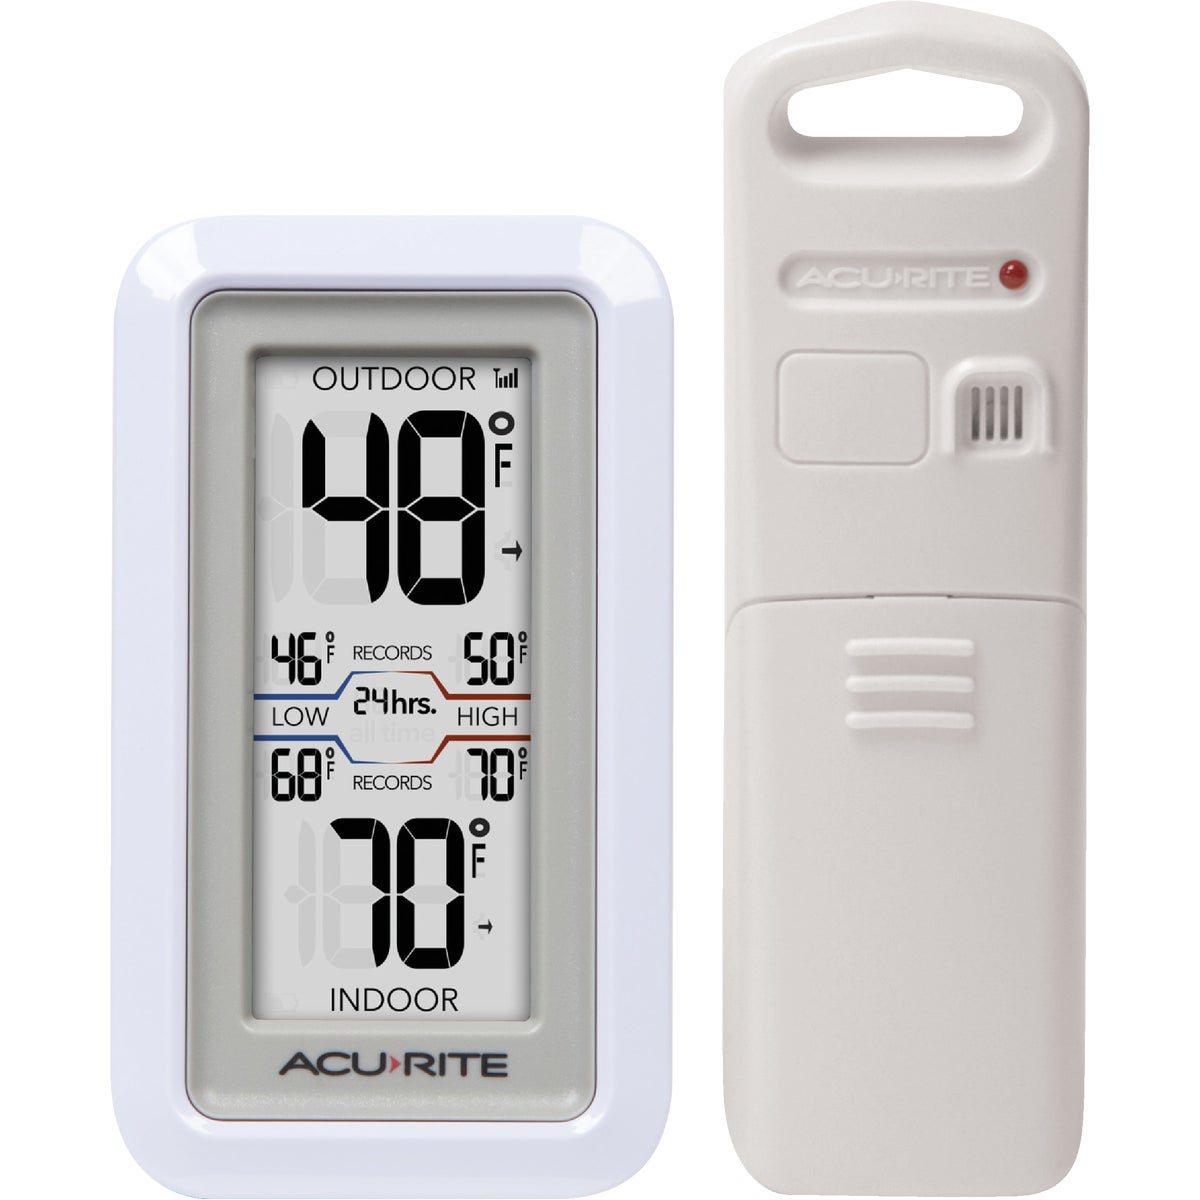 Item 642716, Wireless indoor/outdoor thermometer provides accurate, reliable temperature